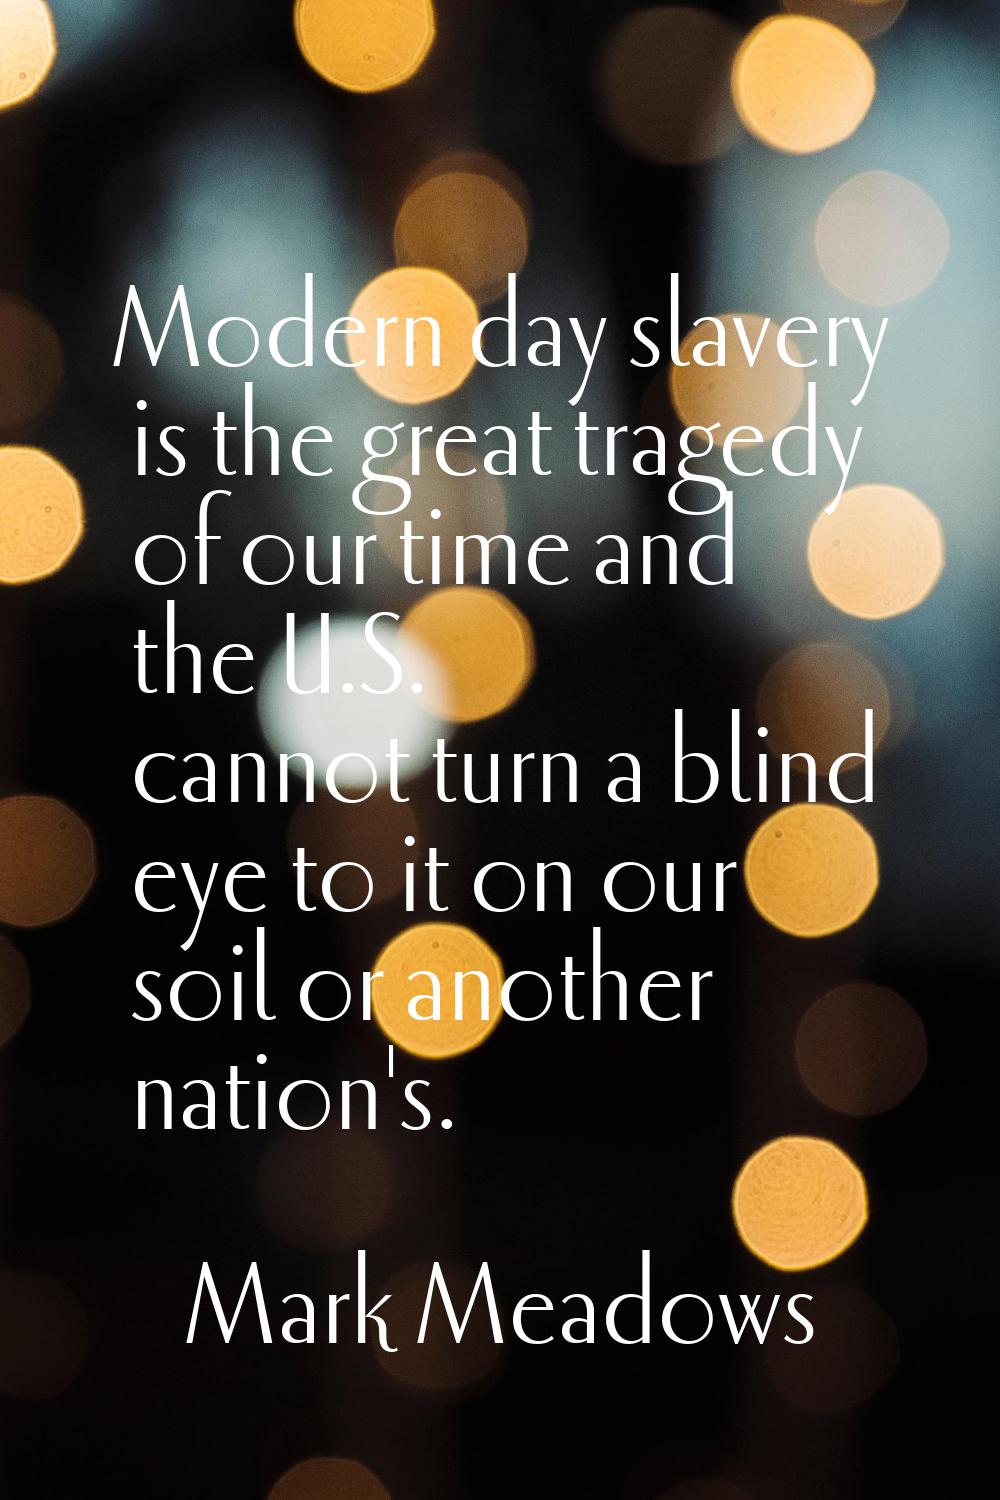 Modern day slavery is the great tragedy of our time and the U.S. cannot turn a blind eye to it on o